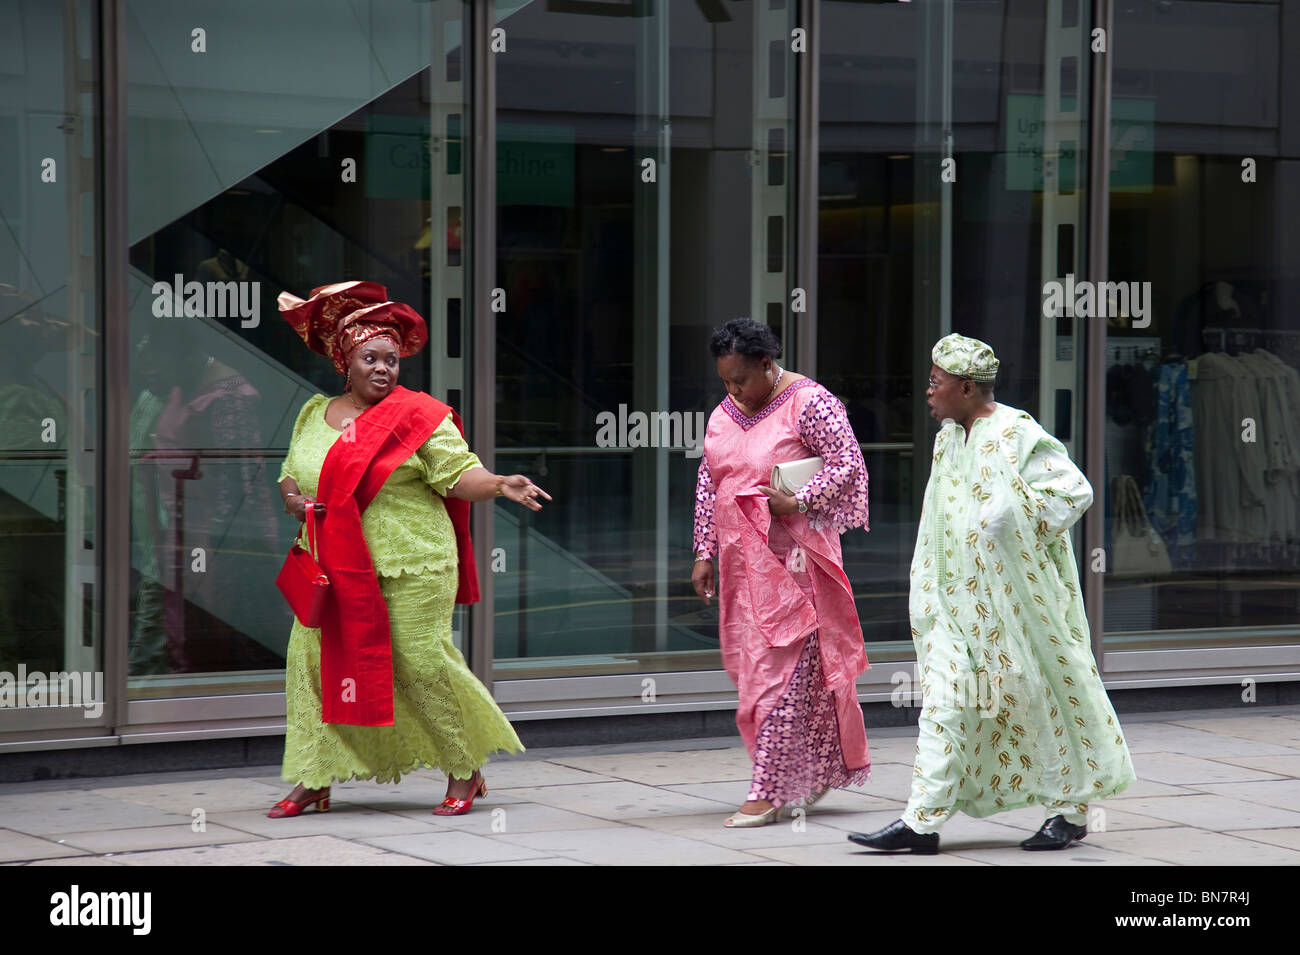 A man and two women of African origin in colourful robes in the streets of London Stock Photo